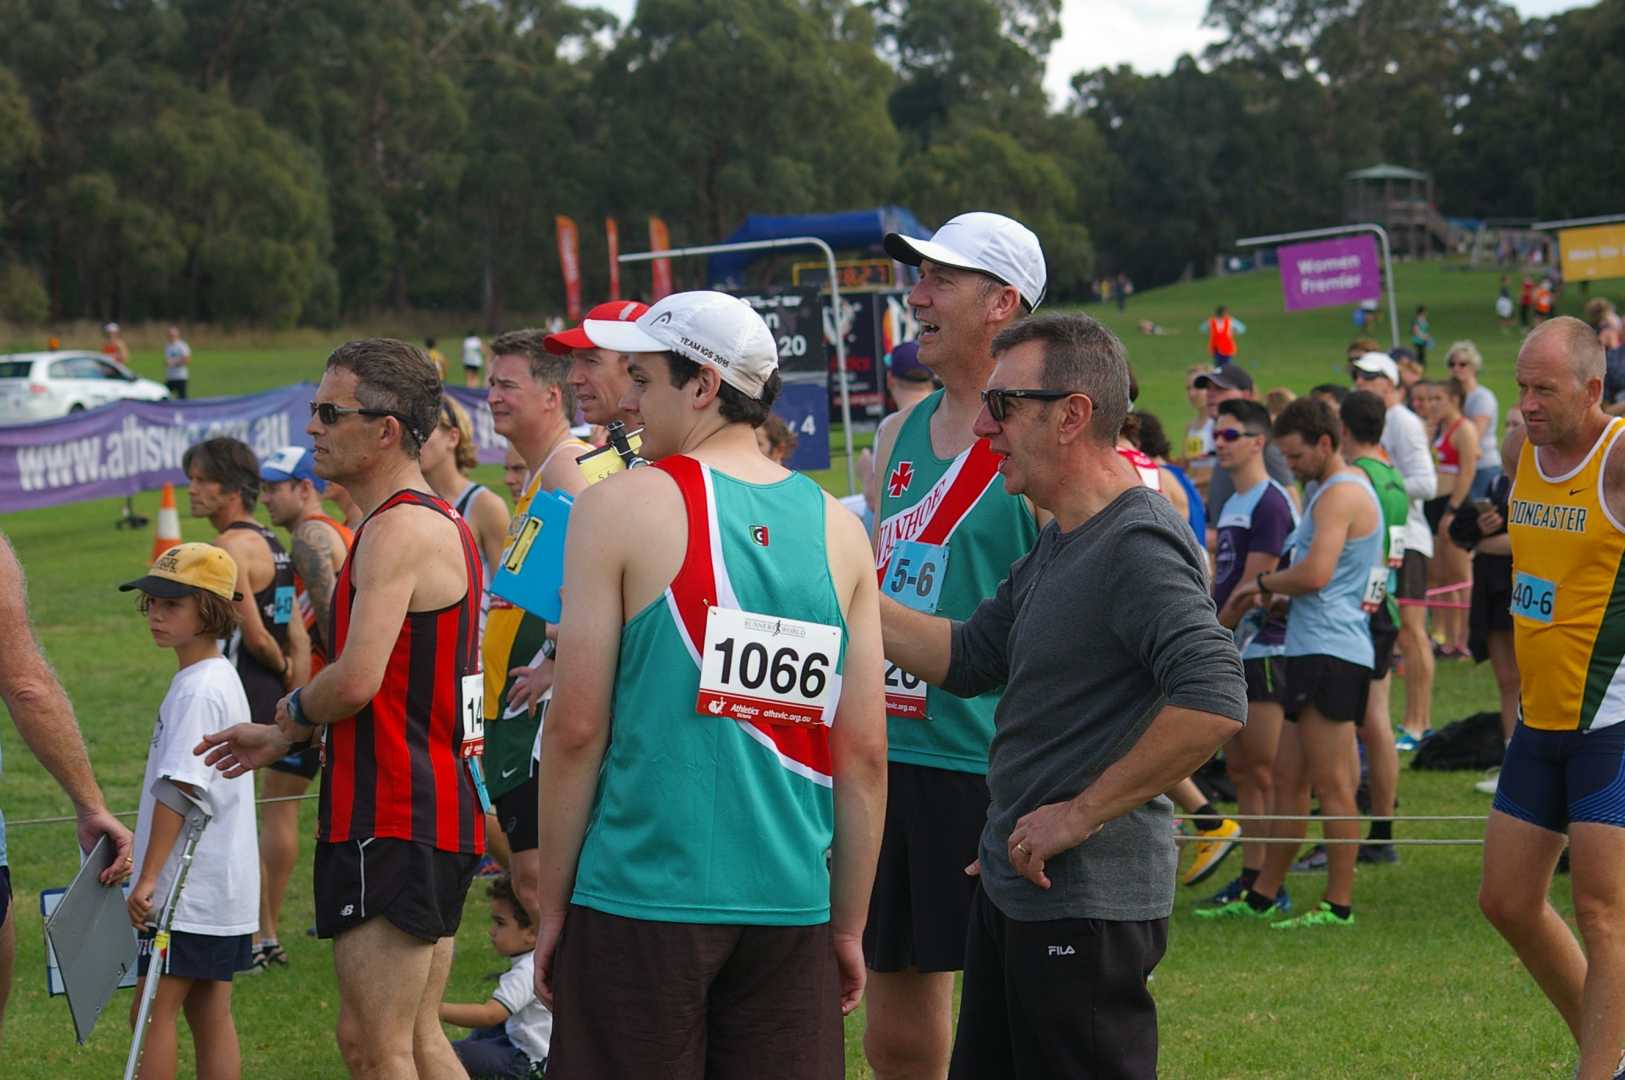 Tom, Travis and John looking on as the lead runners complete their first lap.